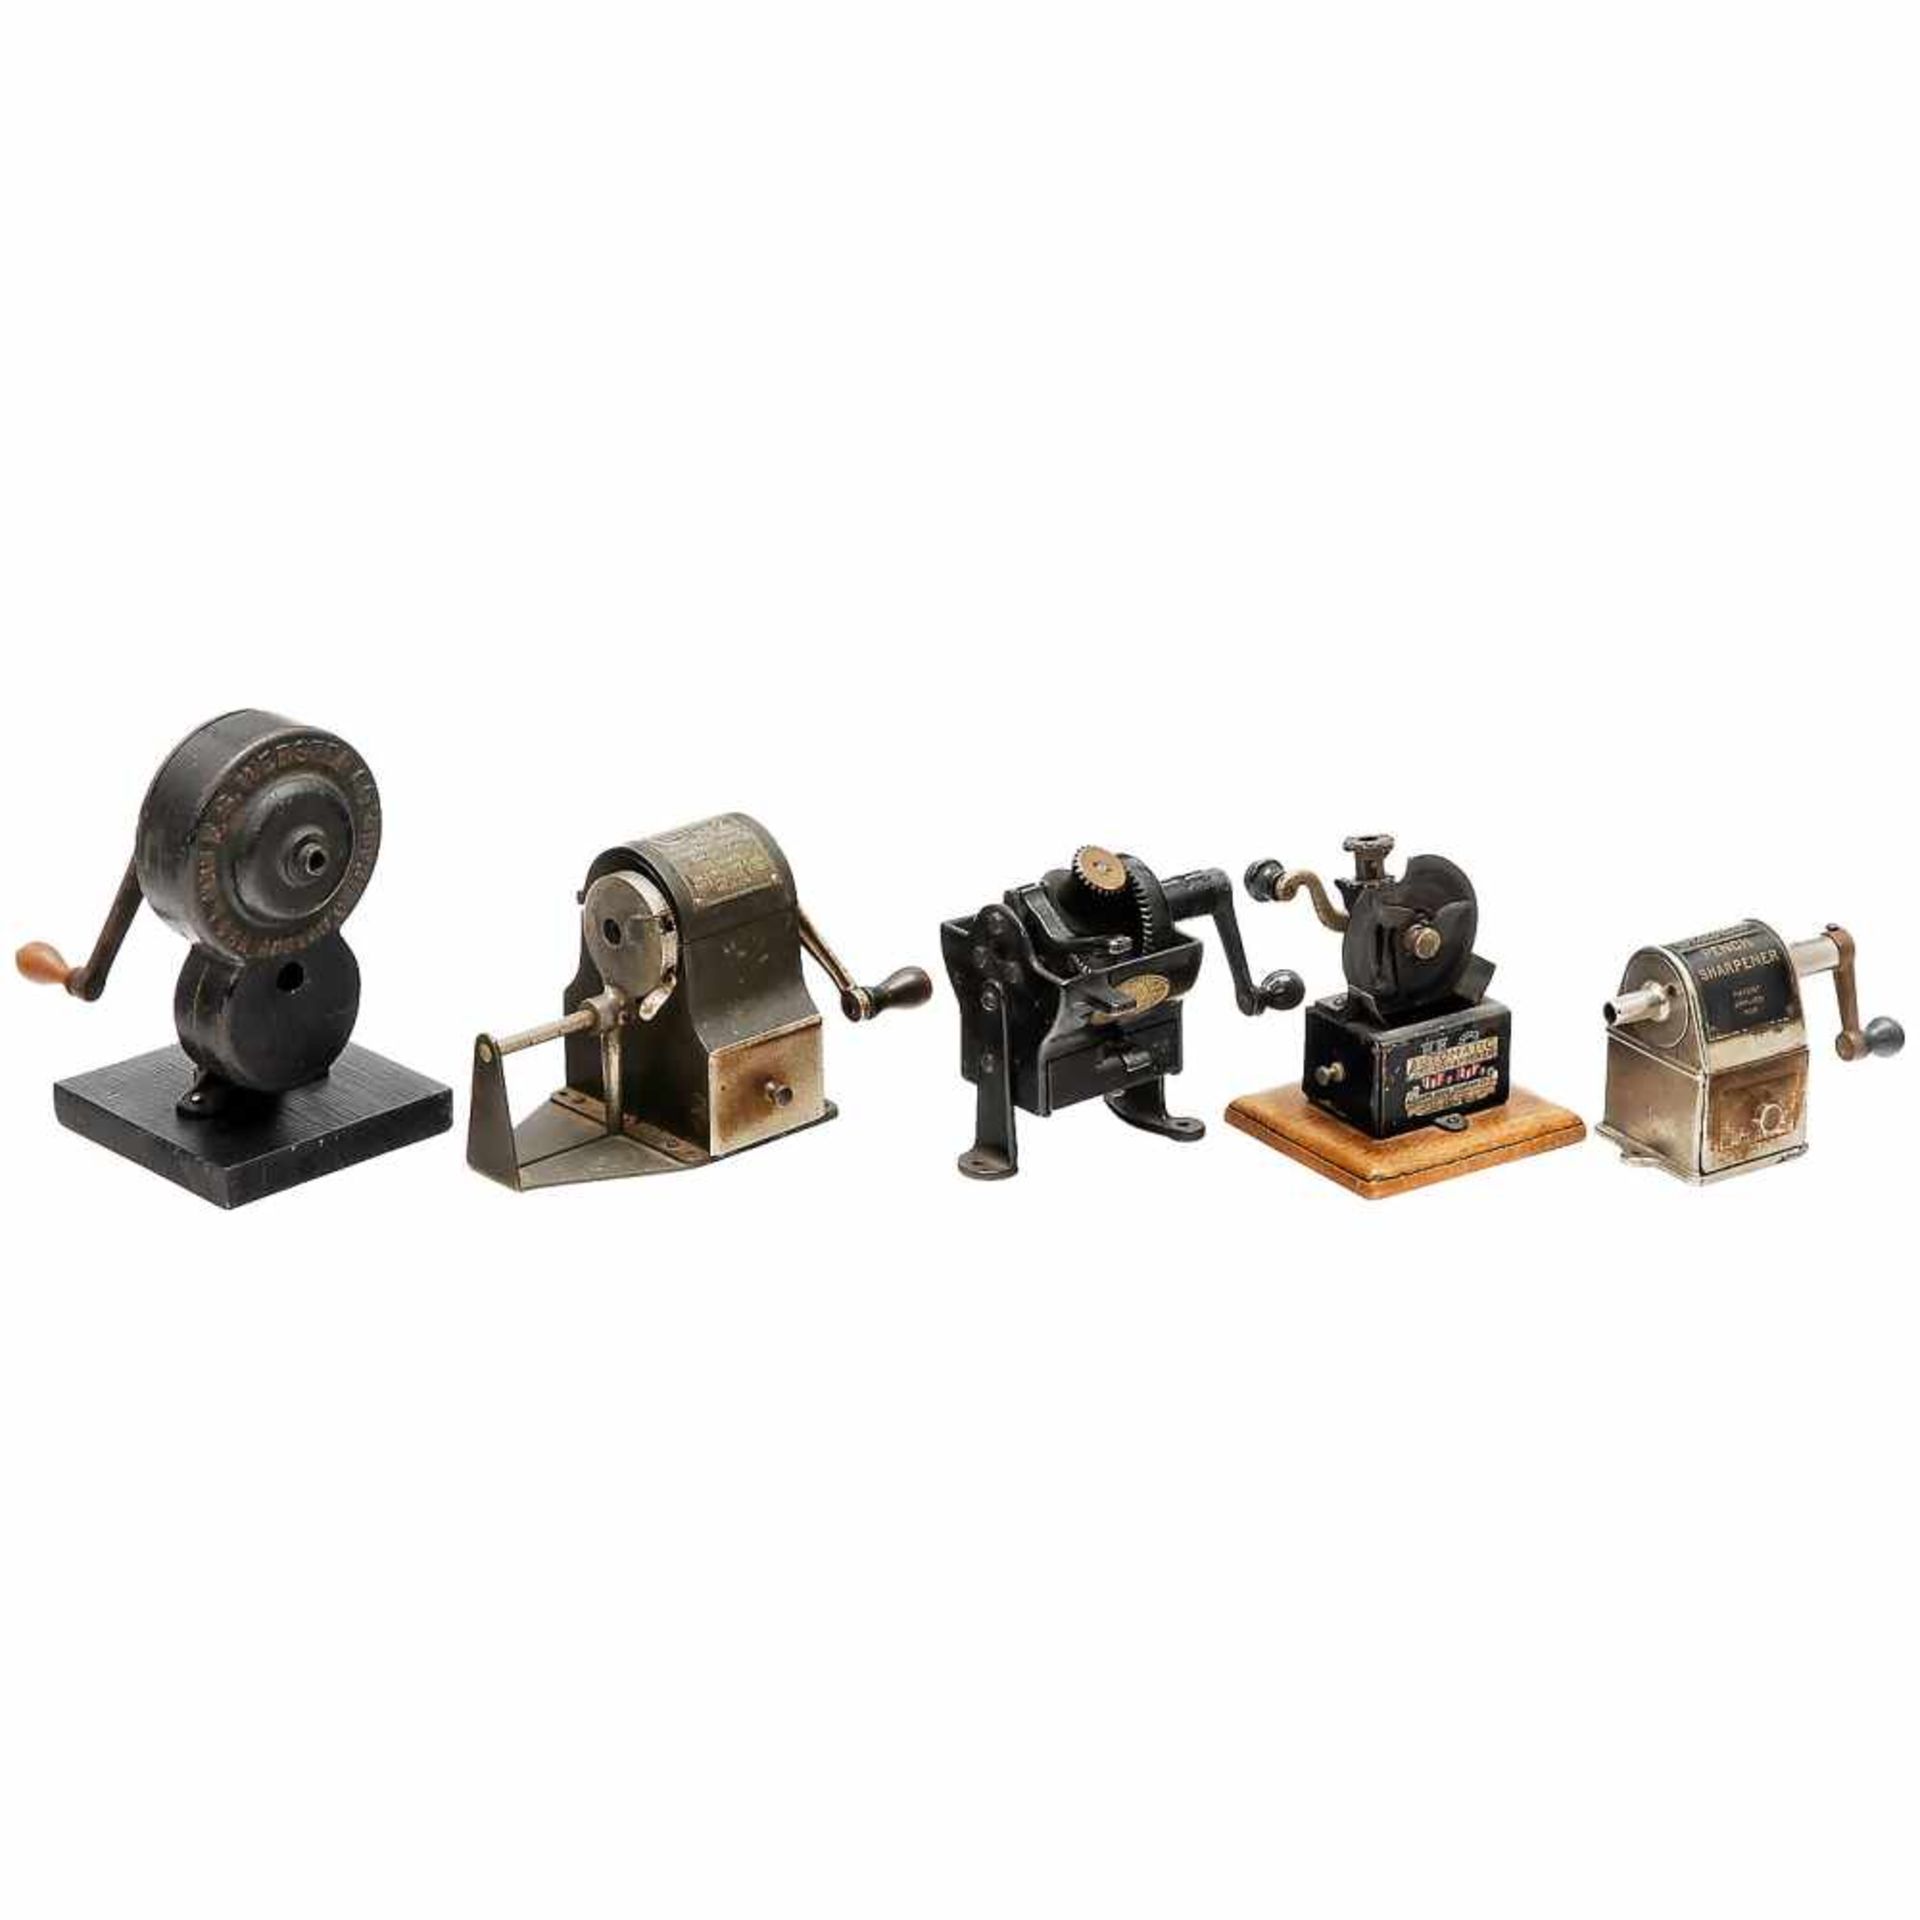 5 Antique Mechanical Pencil Sharpeners1) A.B. Dick Company, Chicago. Planetary Pencil Pointer, c.